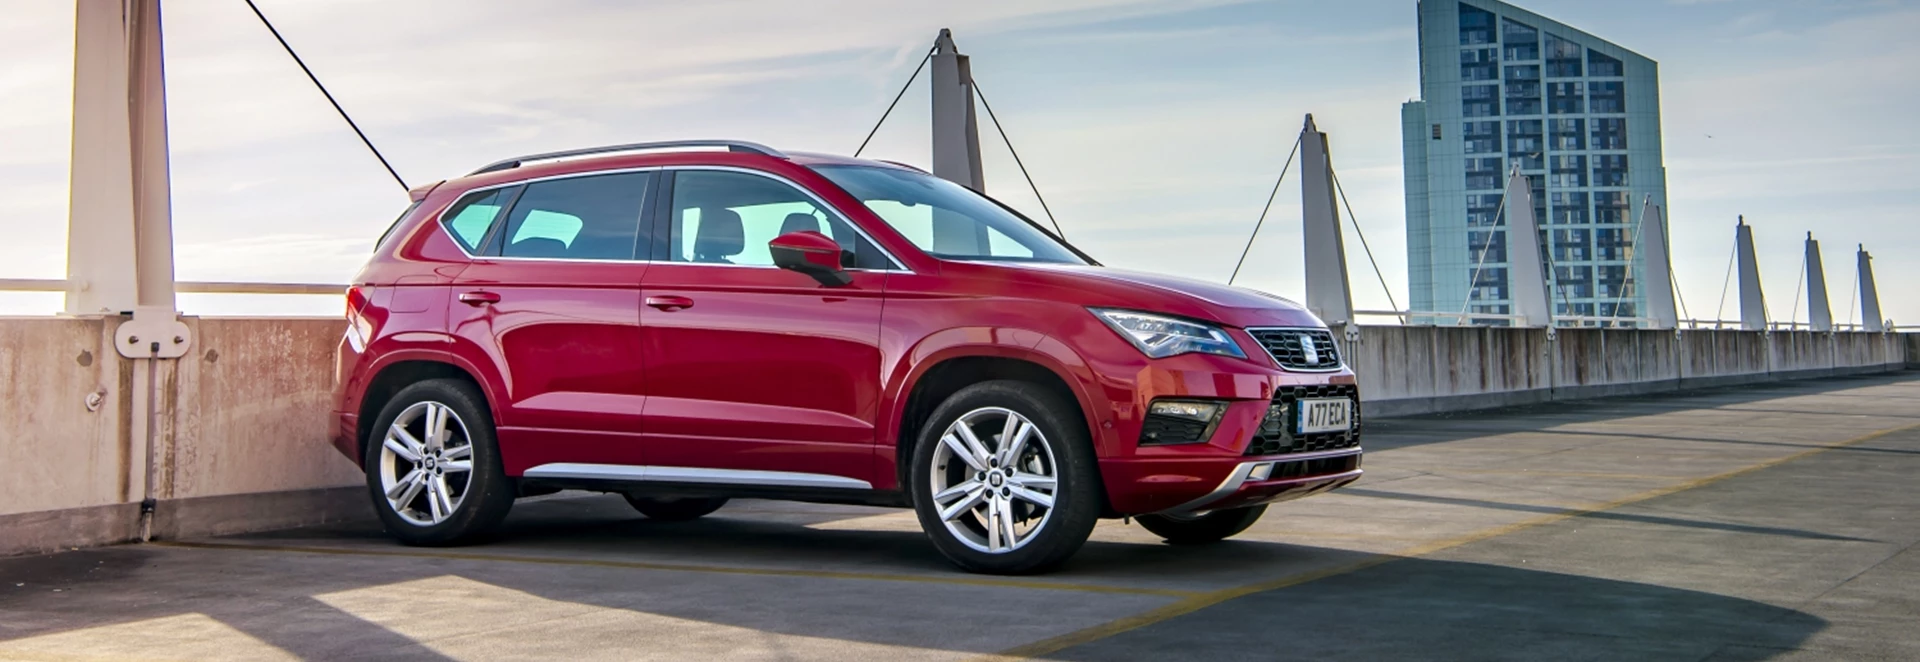 Five reasons why the Seat Ateca is an ideal family car